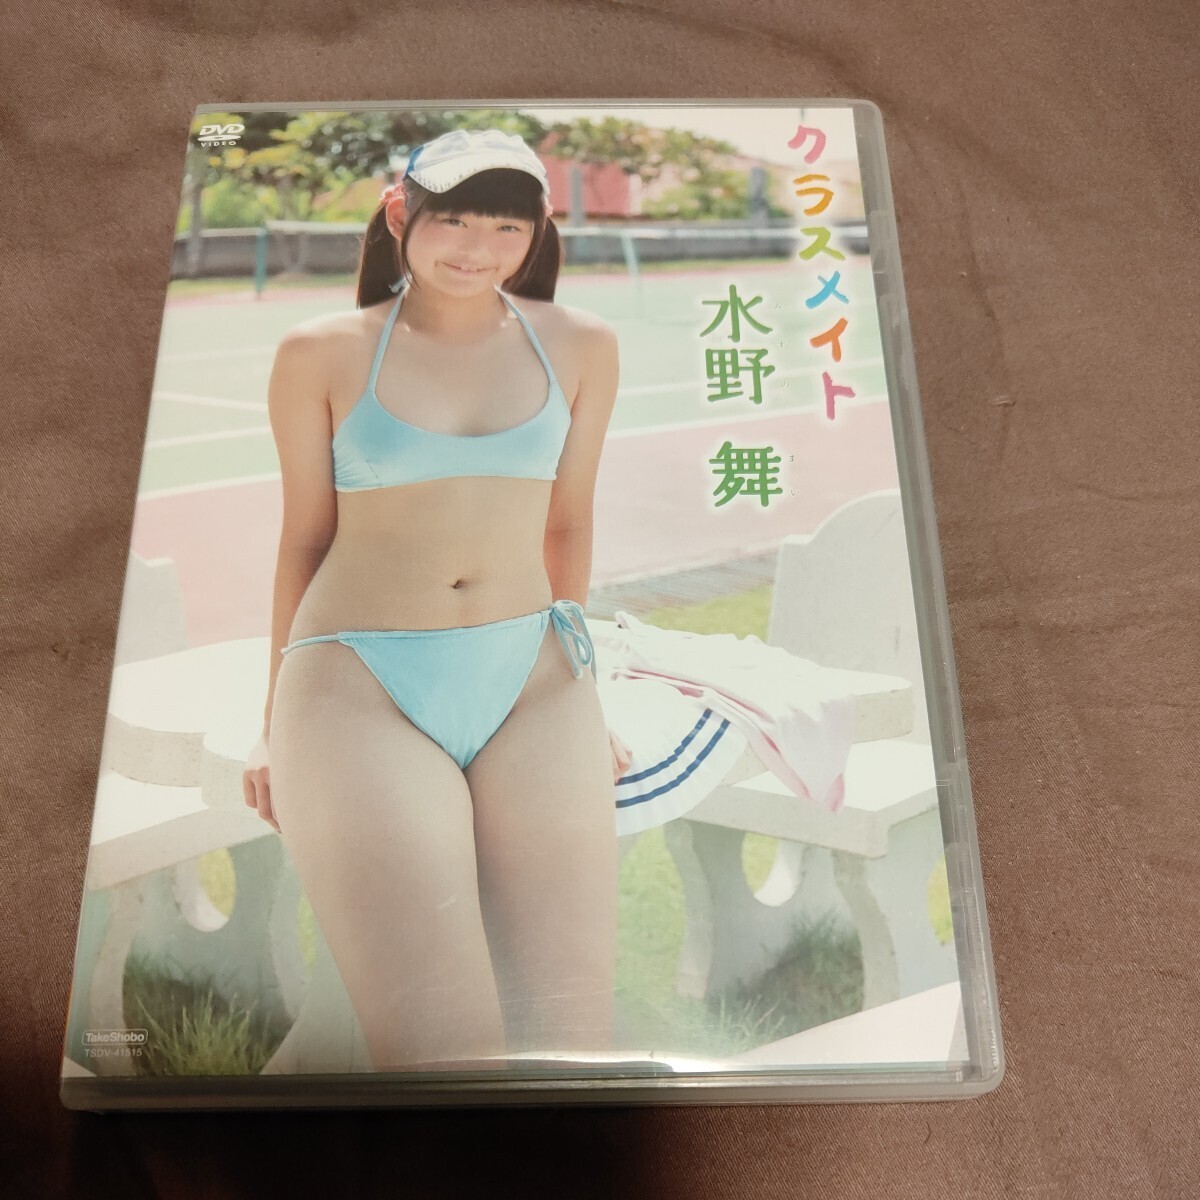  water . Mai Class Mate cell record DVD anonymity shipping 